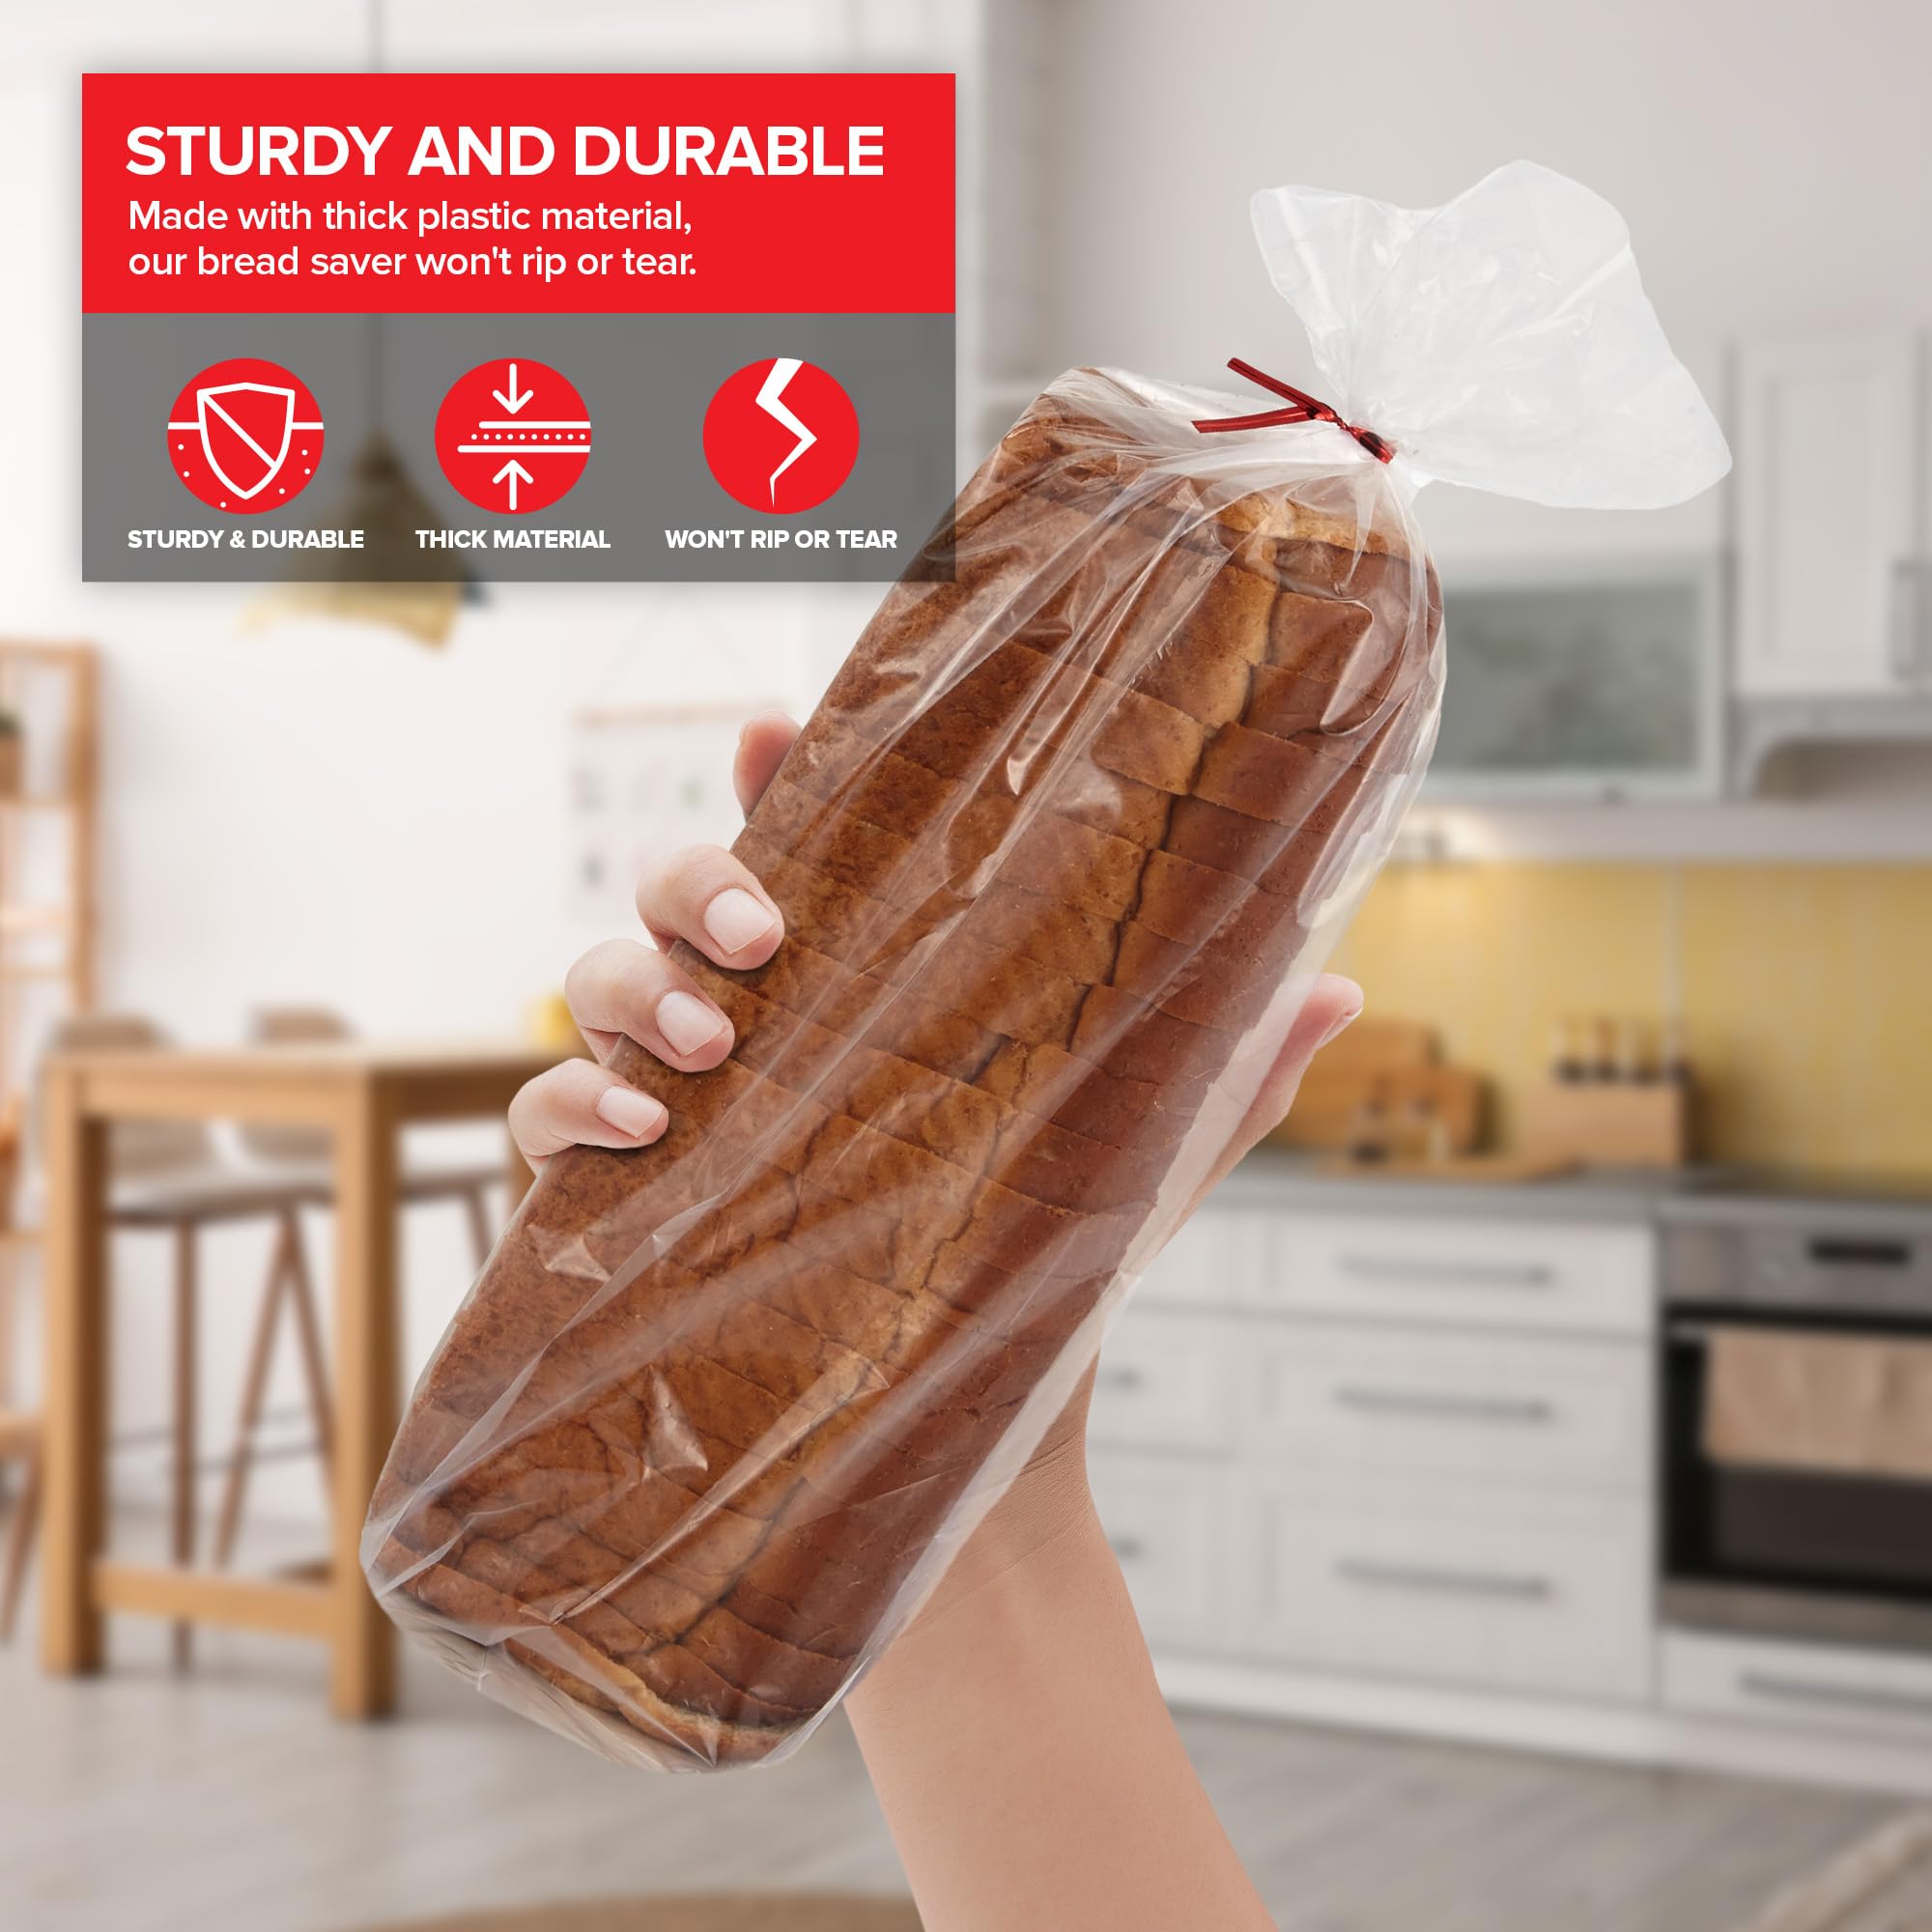 100 Pack Clear Plastic Bread Bags for Homemade Bread Adjustable and Reusable Large Disposable Storage Bag with Twist Ties for Fresh Home-Made Sourdough Loaf, Freezer Safe Airtight BPA-Free